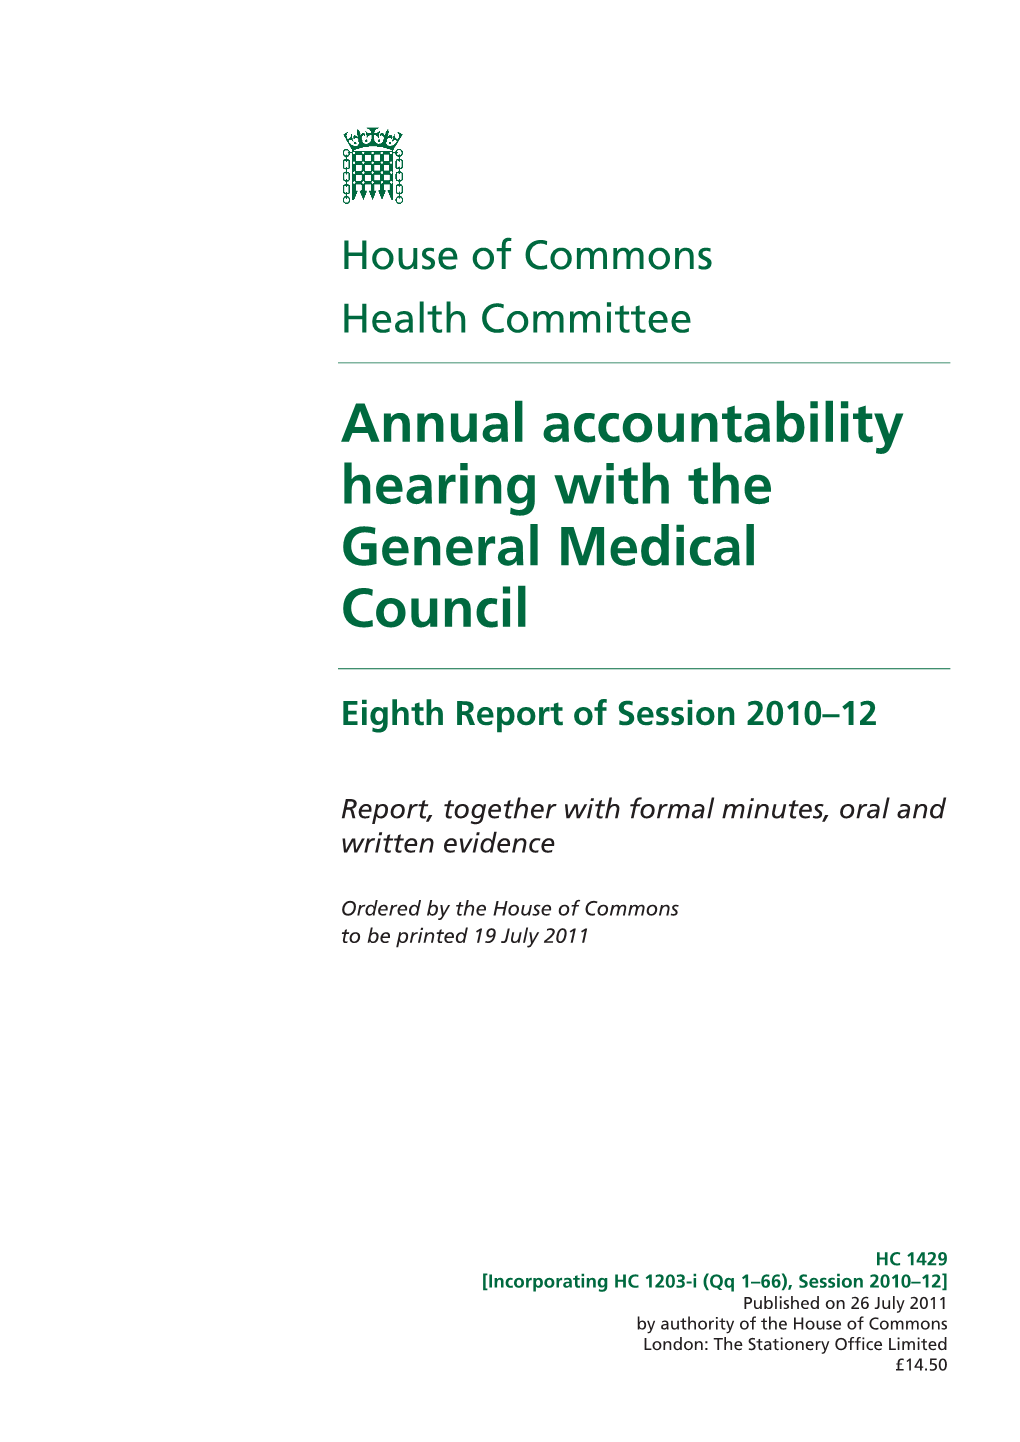 Annual Accountability Hearing with the General Medical Council